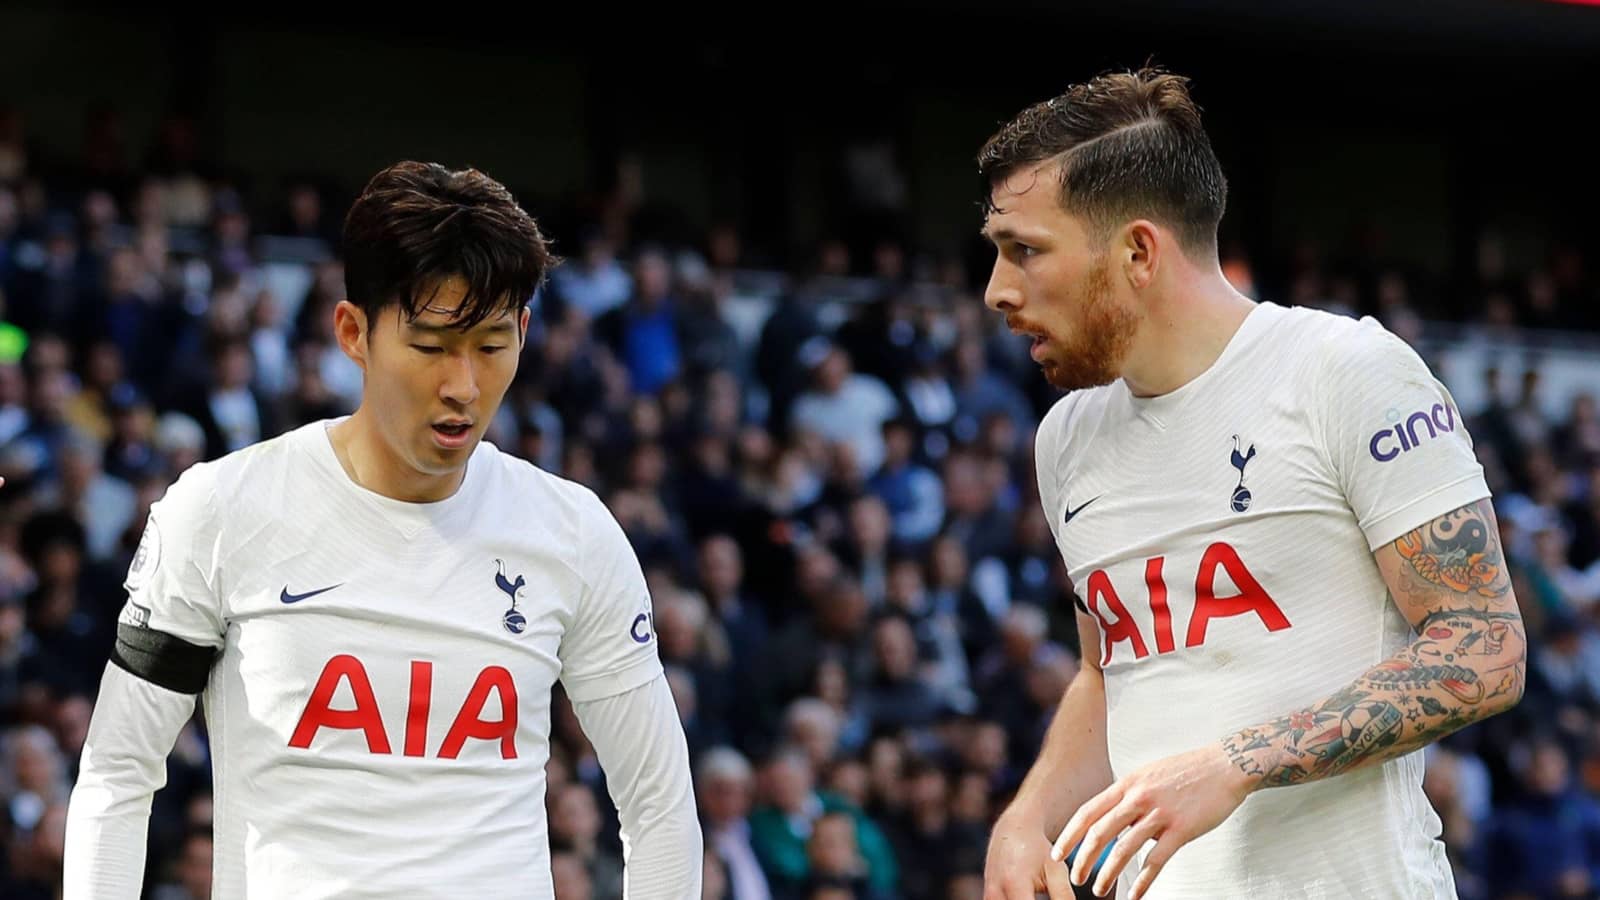 SUMMER TRANSFER:The spurs two key players son heung-min and pierre-Emile are going be leaving due to the….